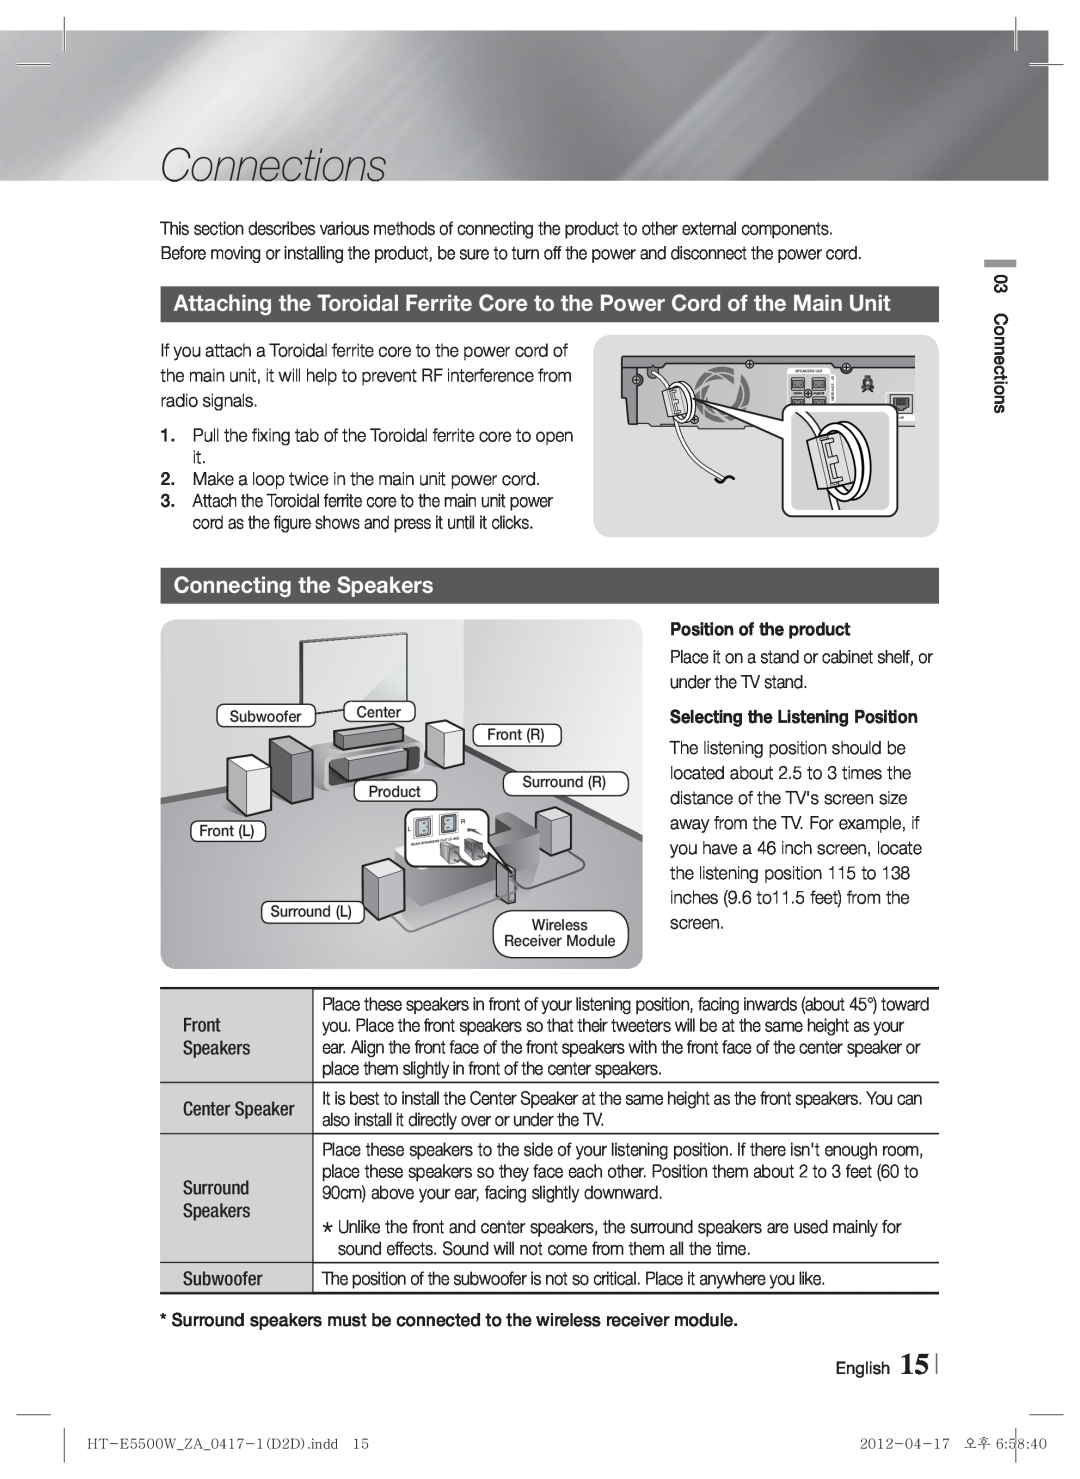 Samsung HT-E550 user manual Connections, Connecting the Speakers, Position of the product 